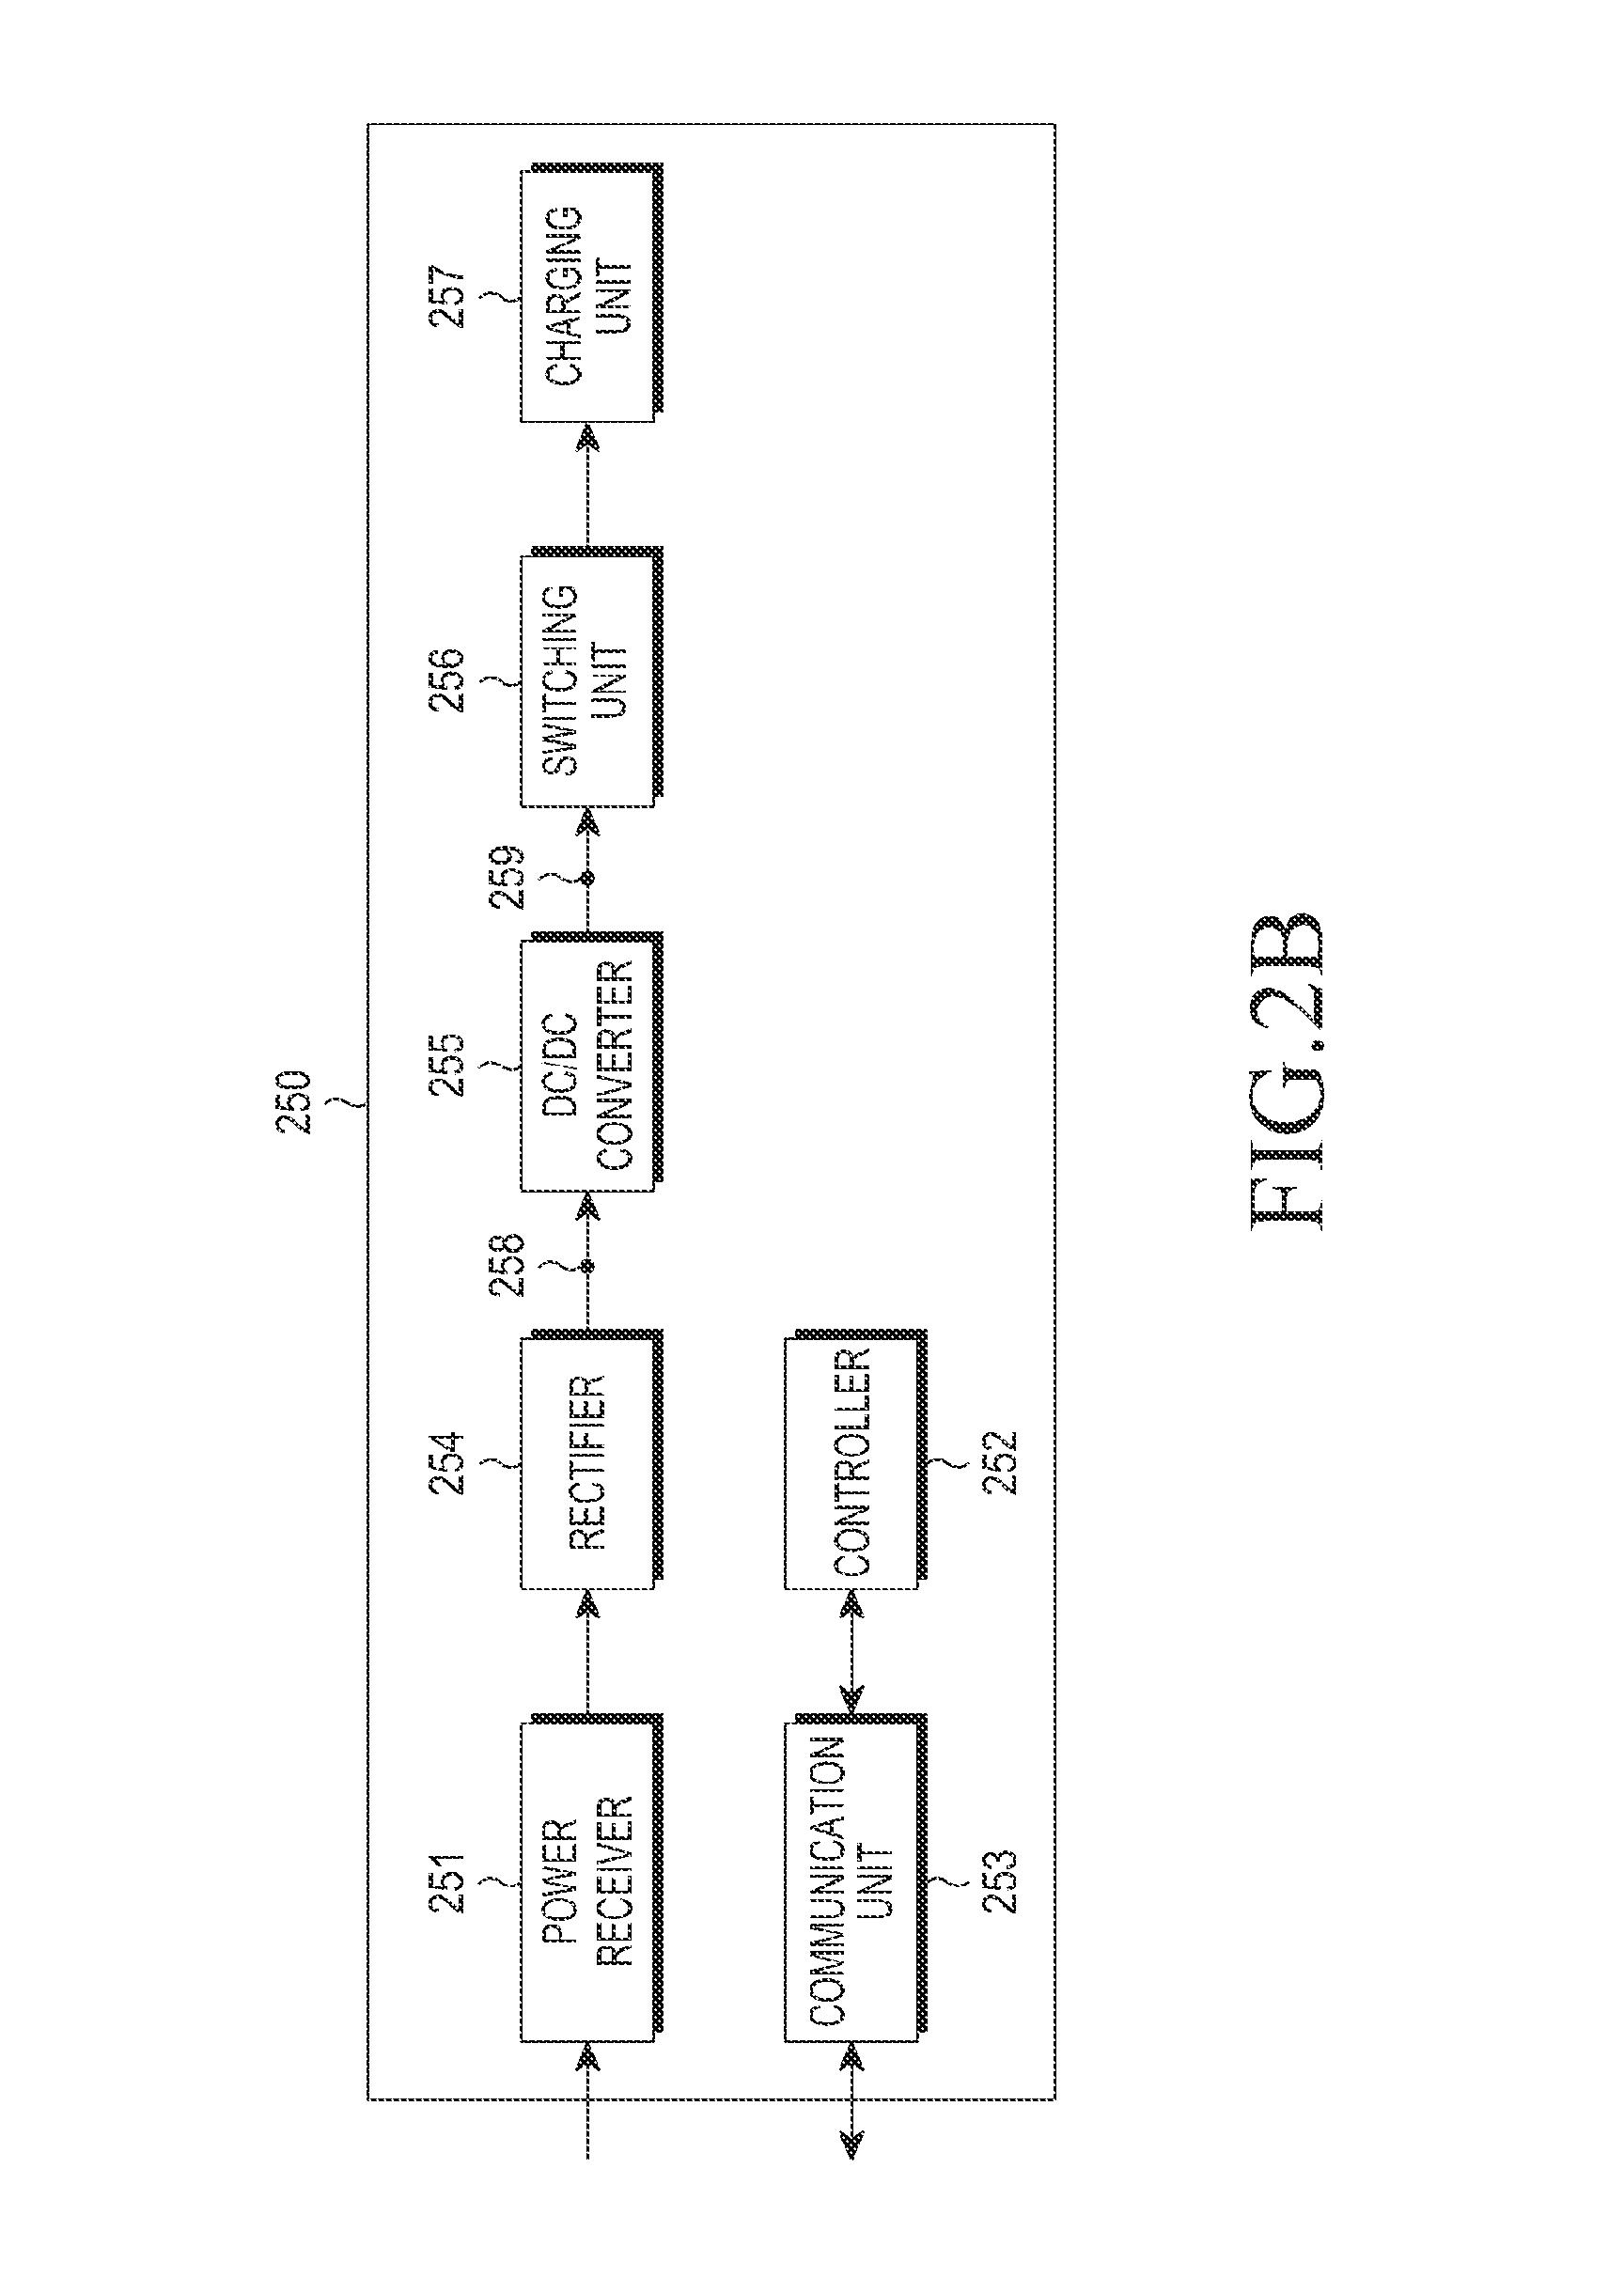 Method and apparatus for protecting wireless power receiver from excessive charging temperature